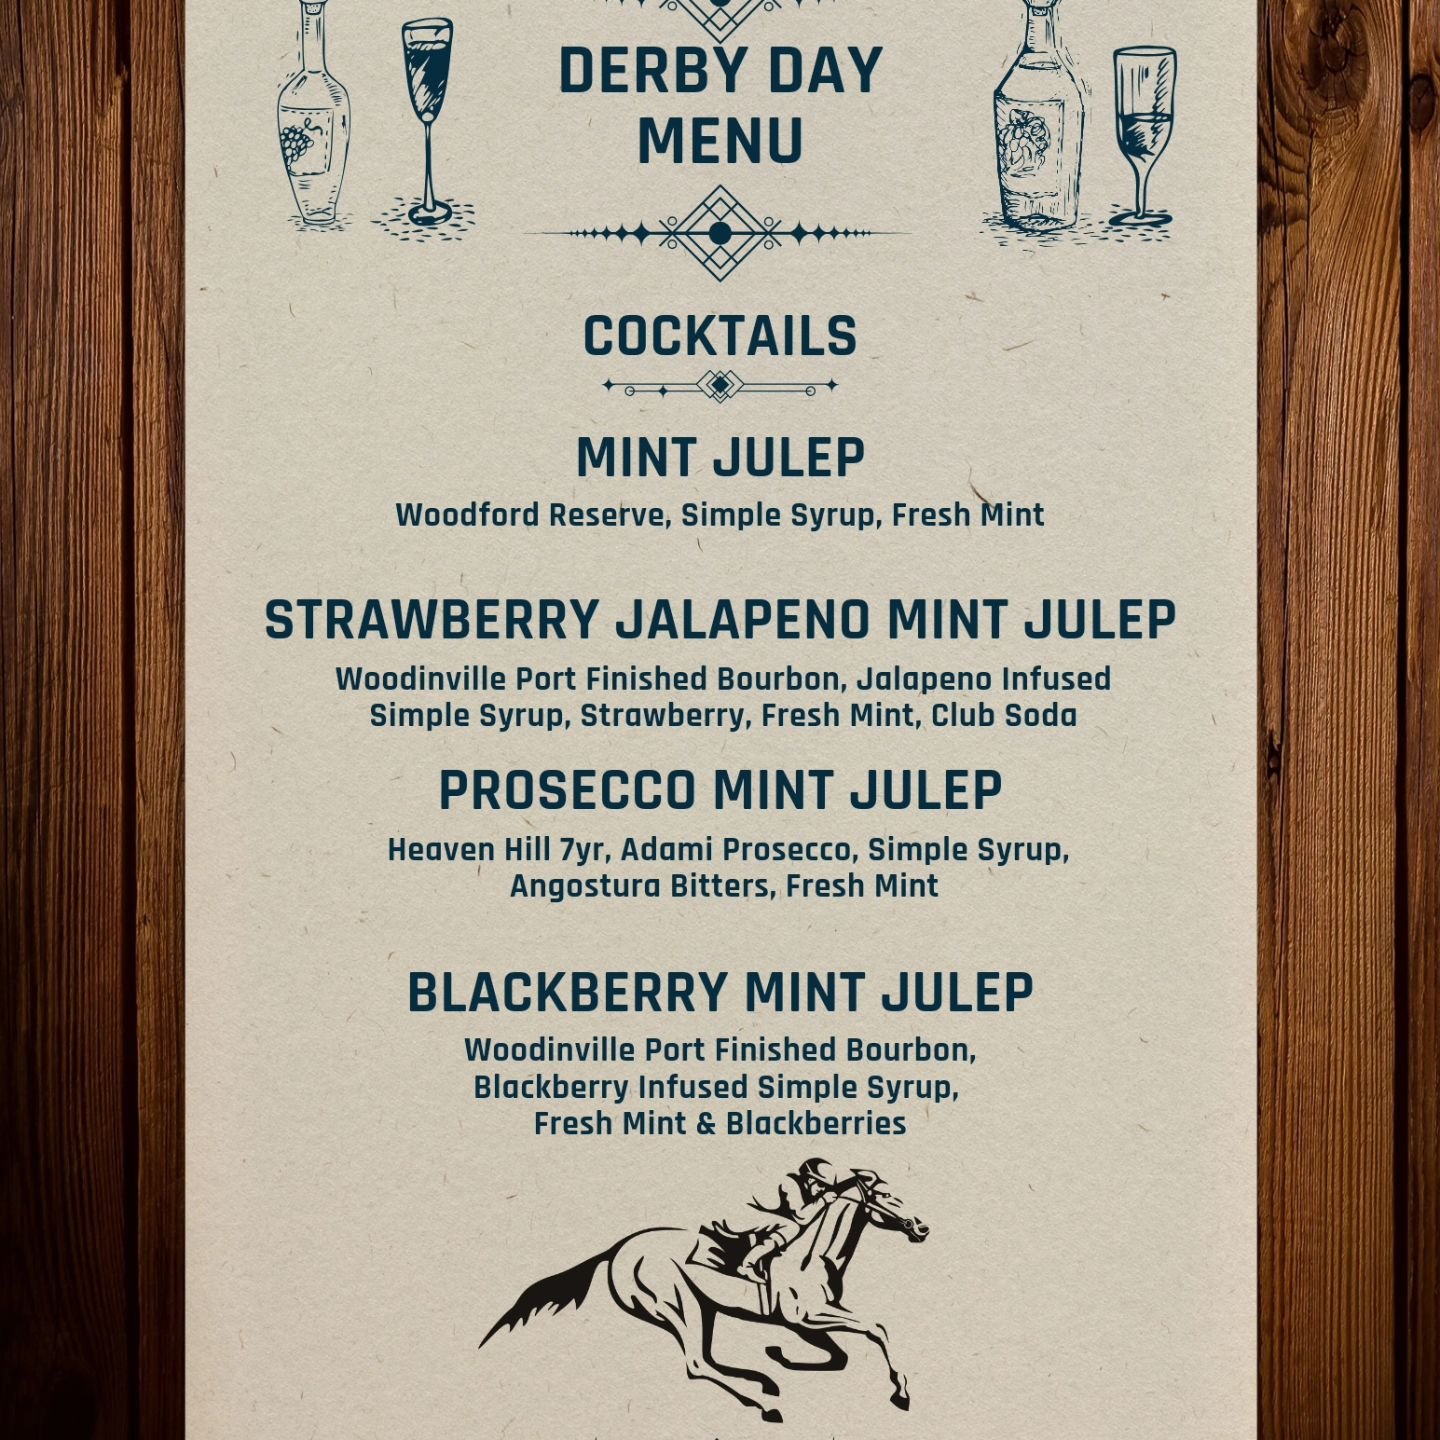 One day only derby day menu tomorrow!!! Check out our Facebook event page for details on contests and giveaways!!!!!!